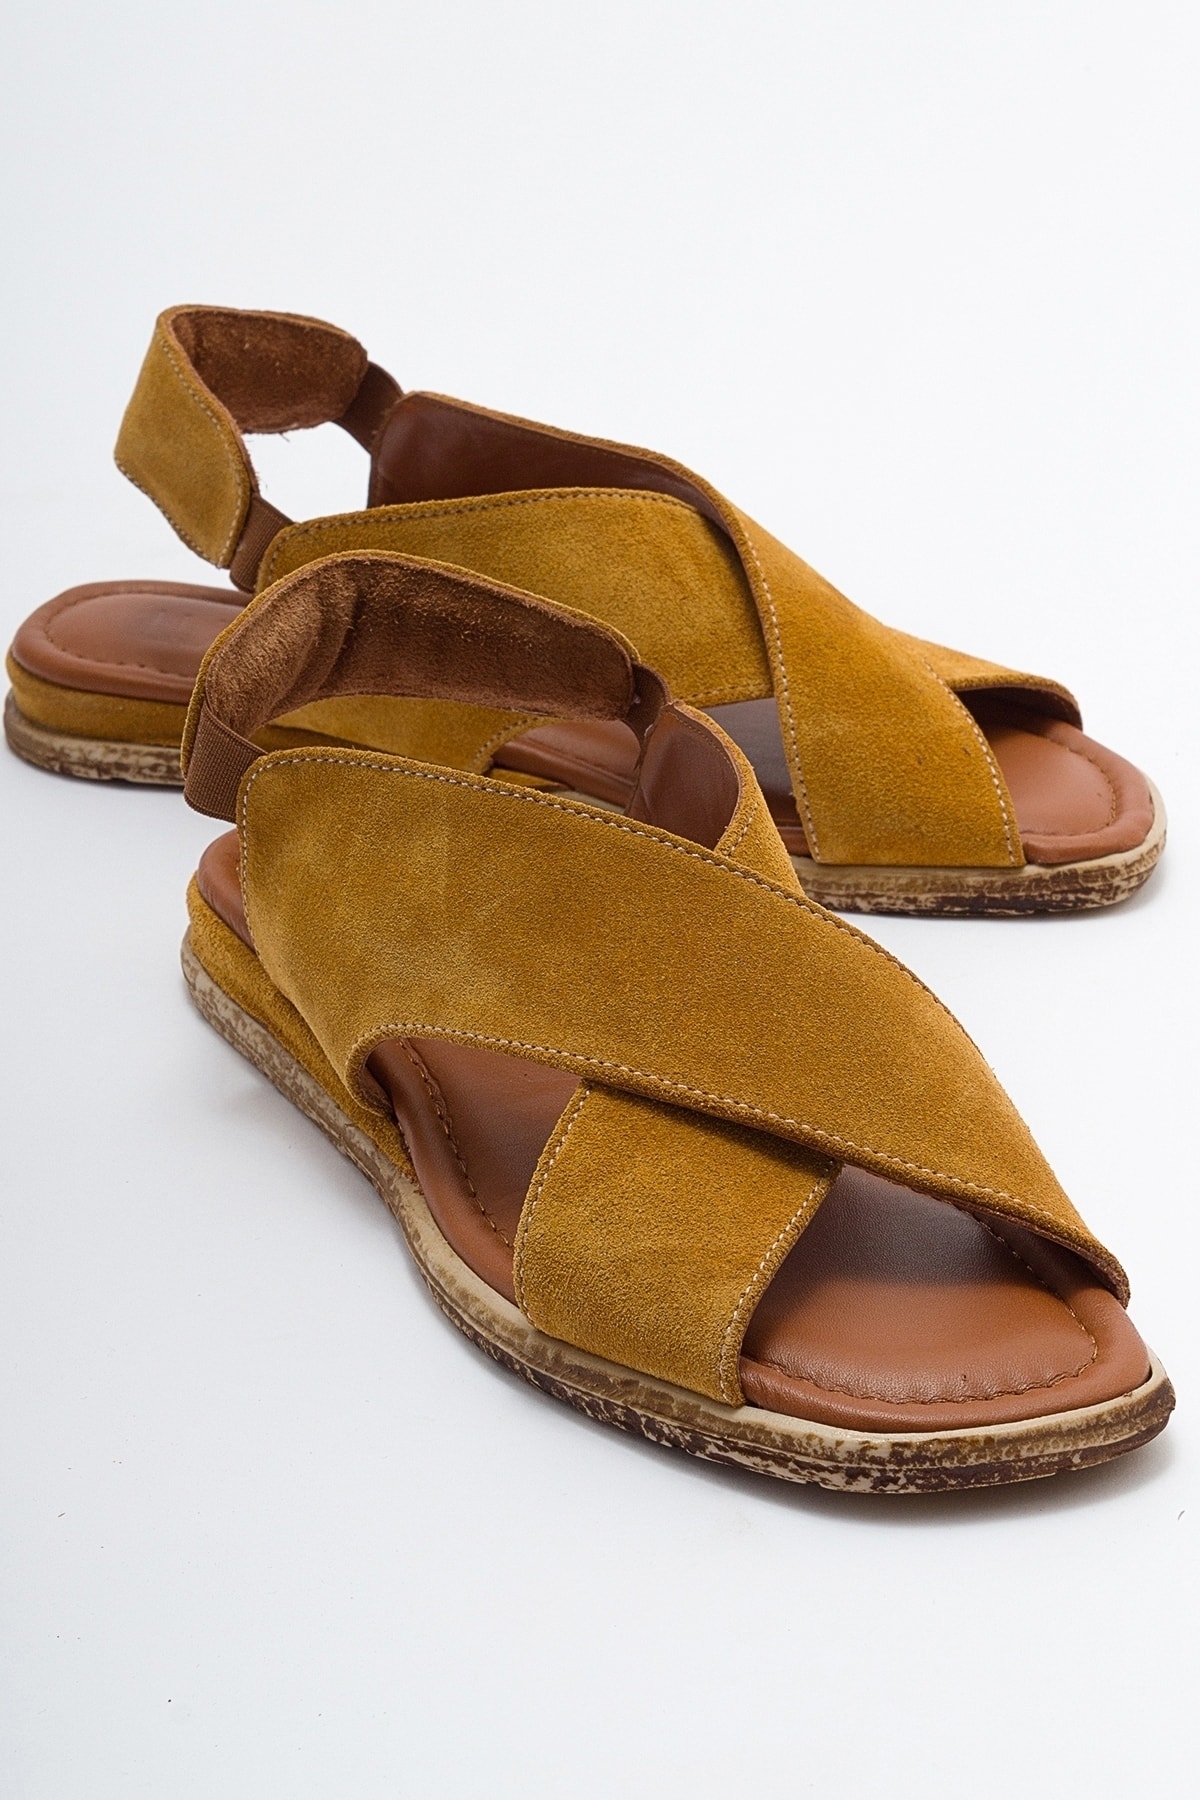 Levně LuviShoes 706 Women's Sandals From Genuine Leather and Mustard Suede.